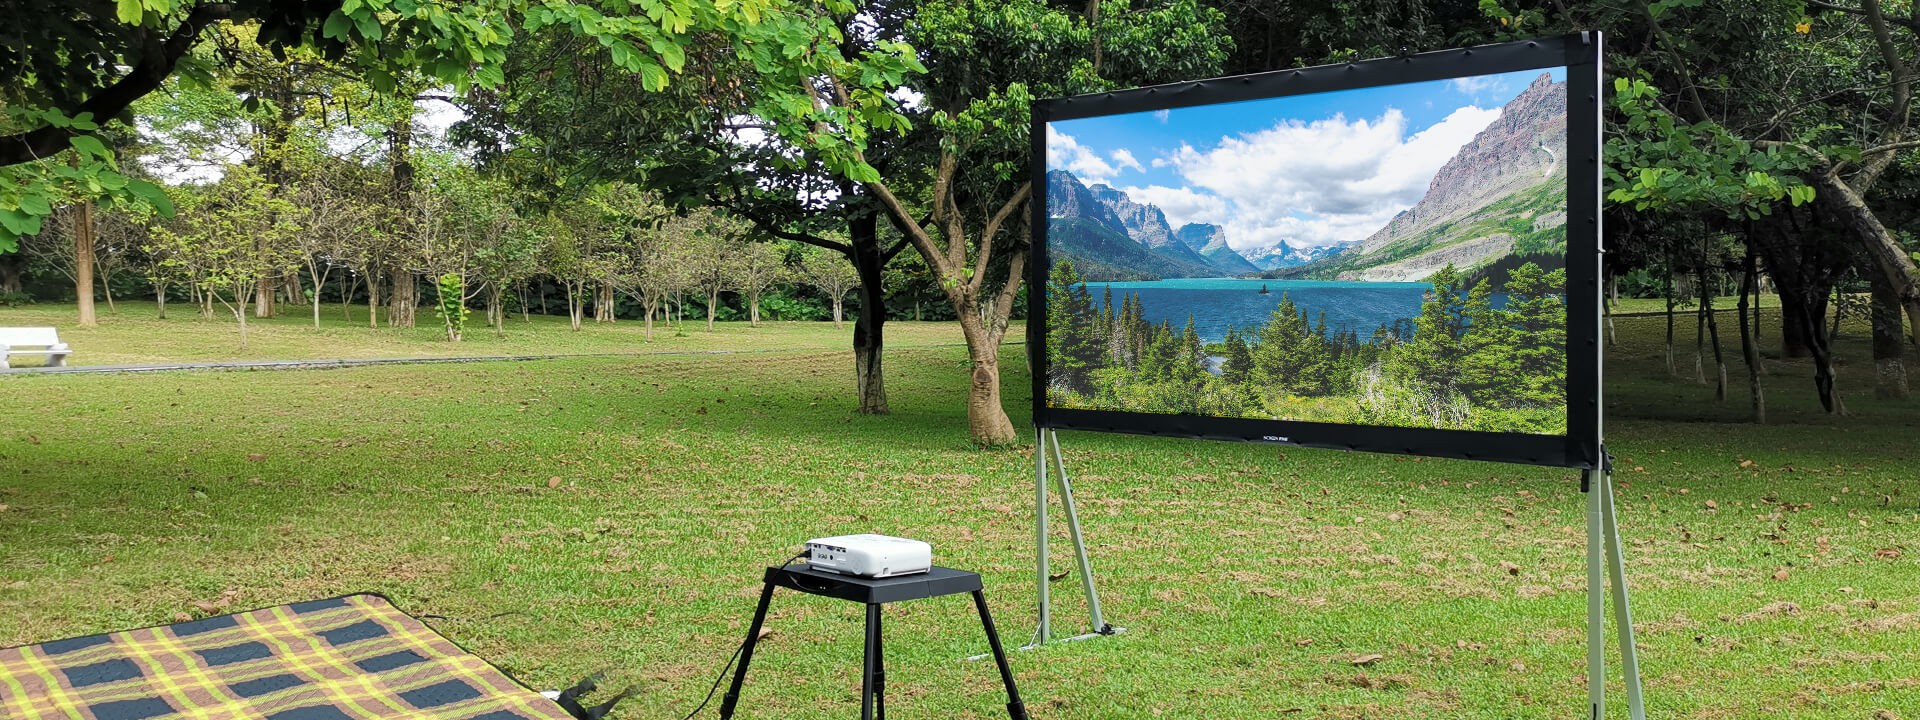 Portable screenpro screen with projector display in a park.